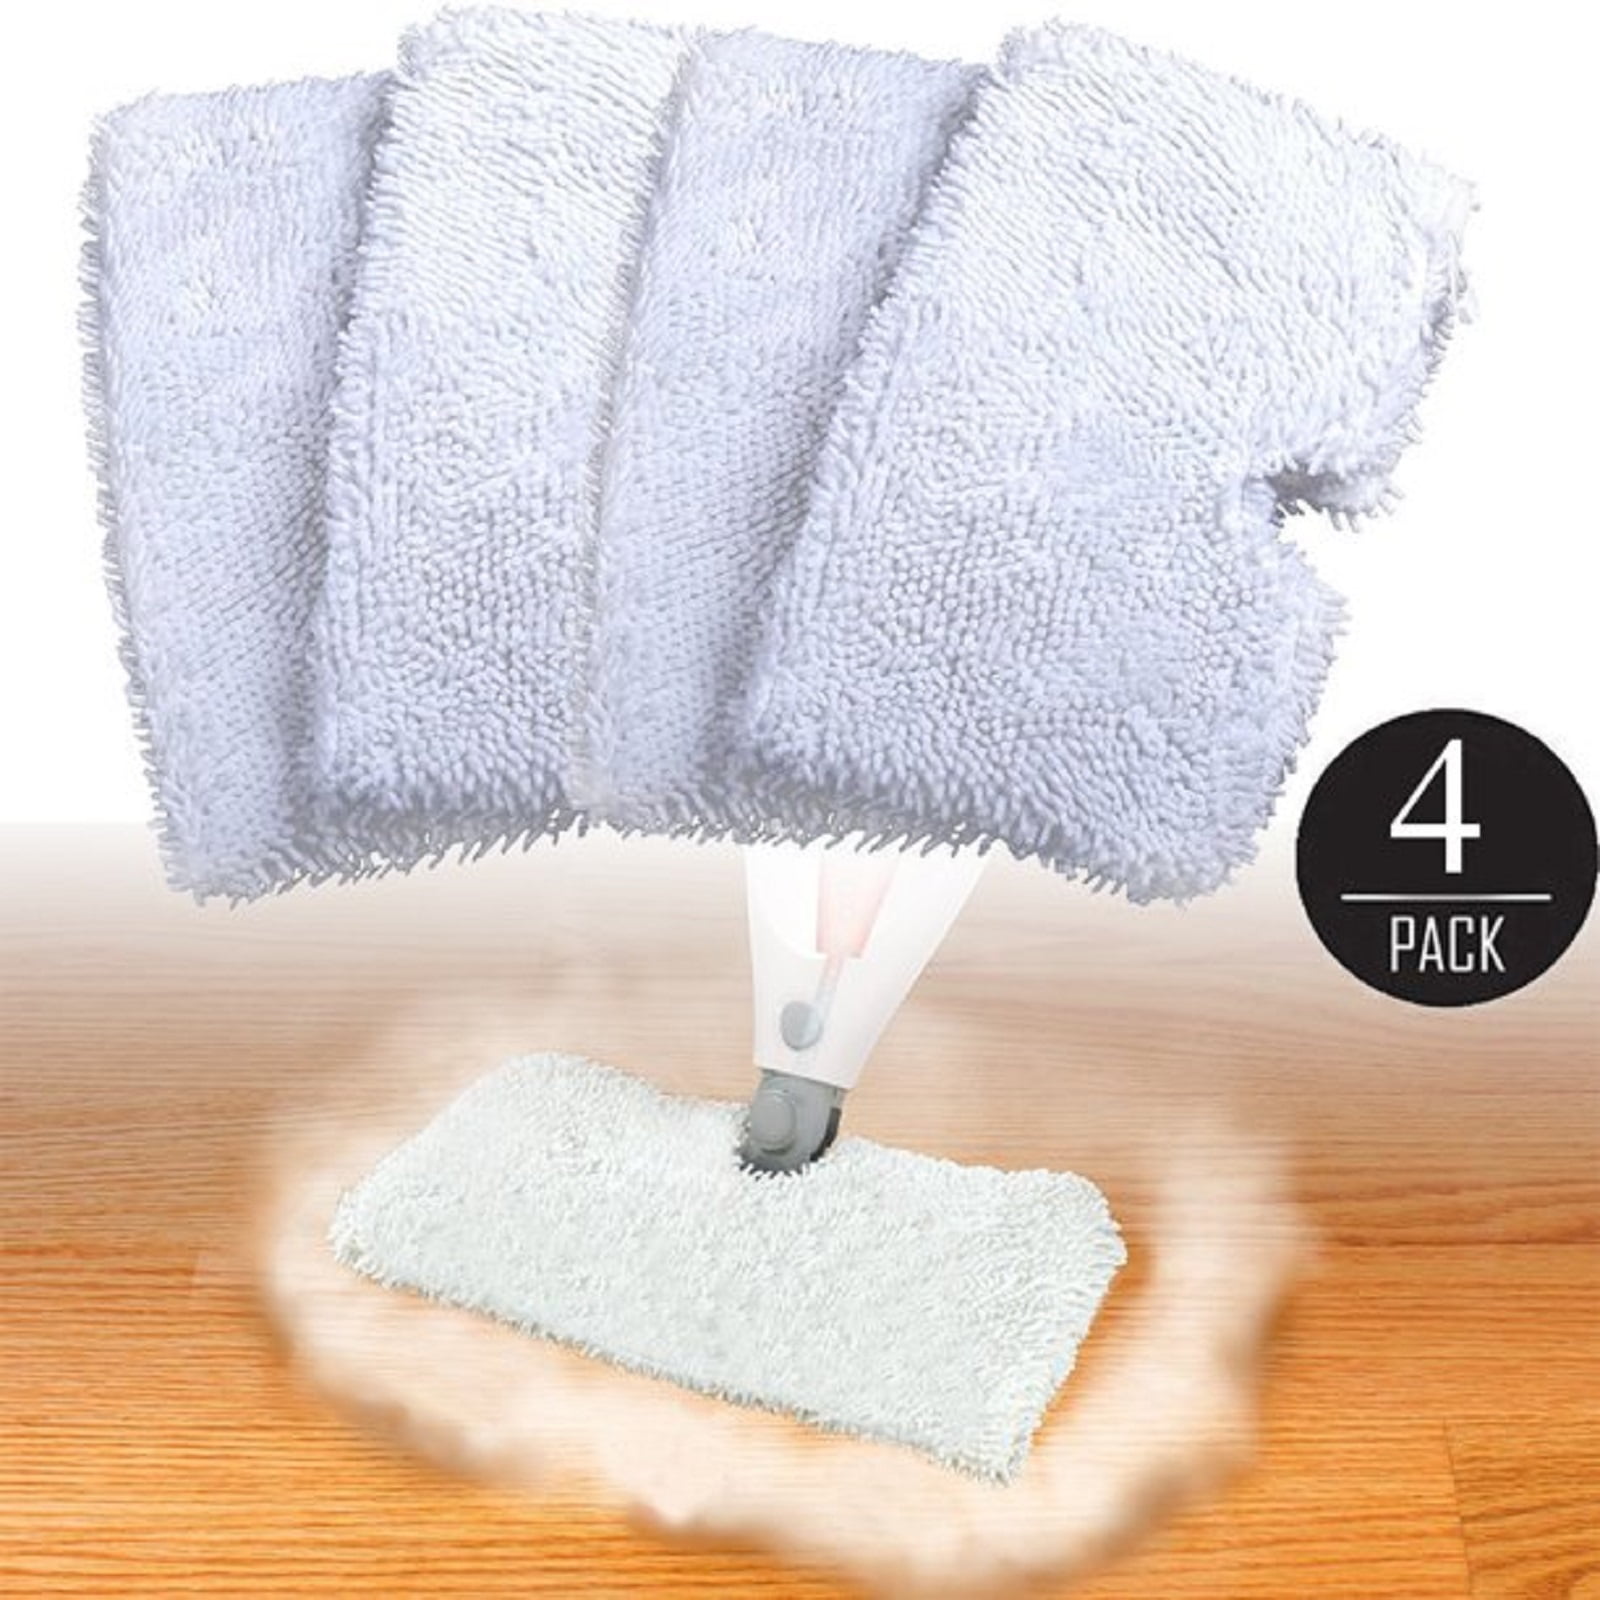  NEAPRO 6 Pack Microfiber Steam Mop Pads Replacement